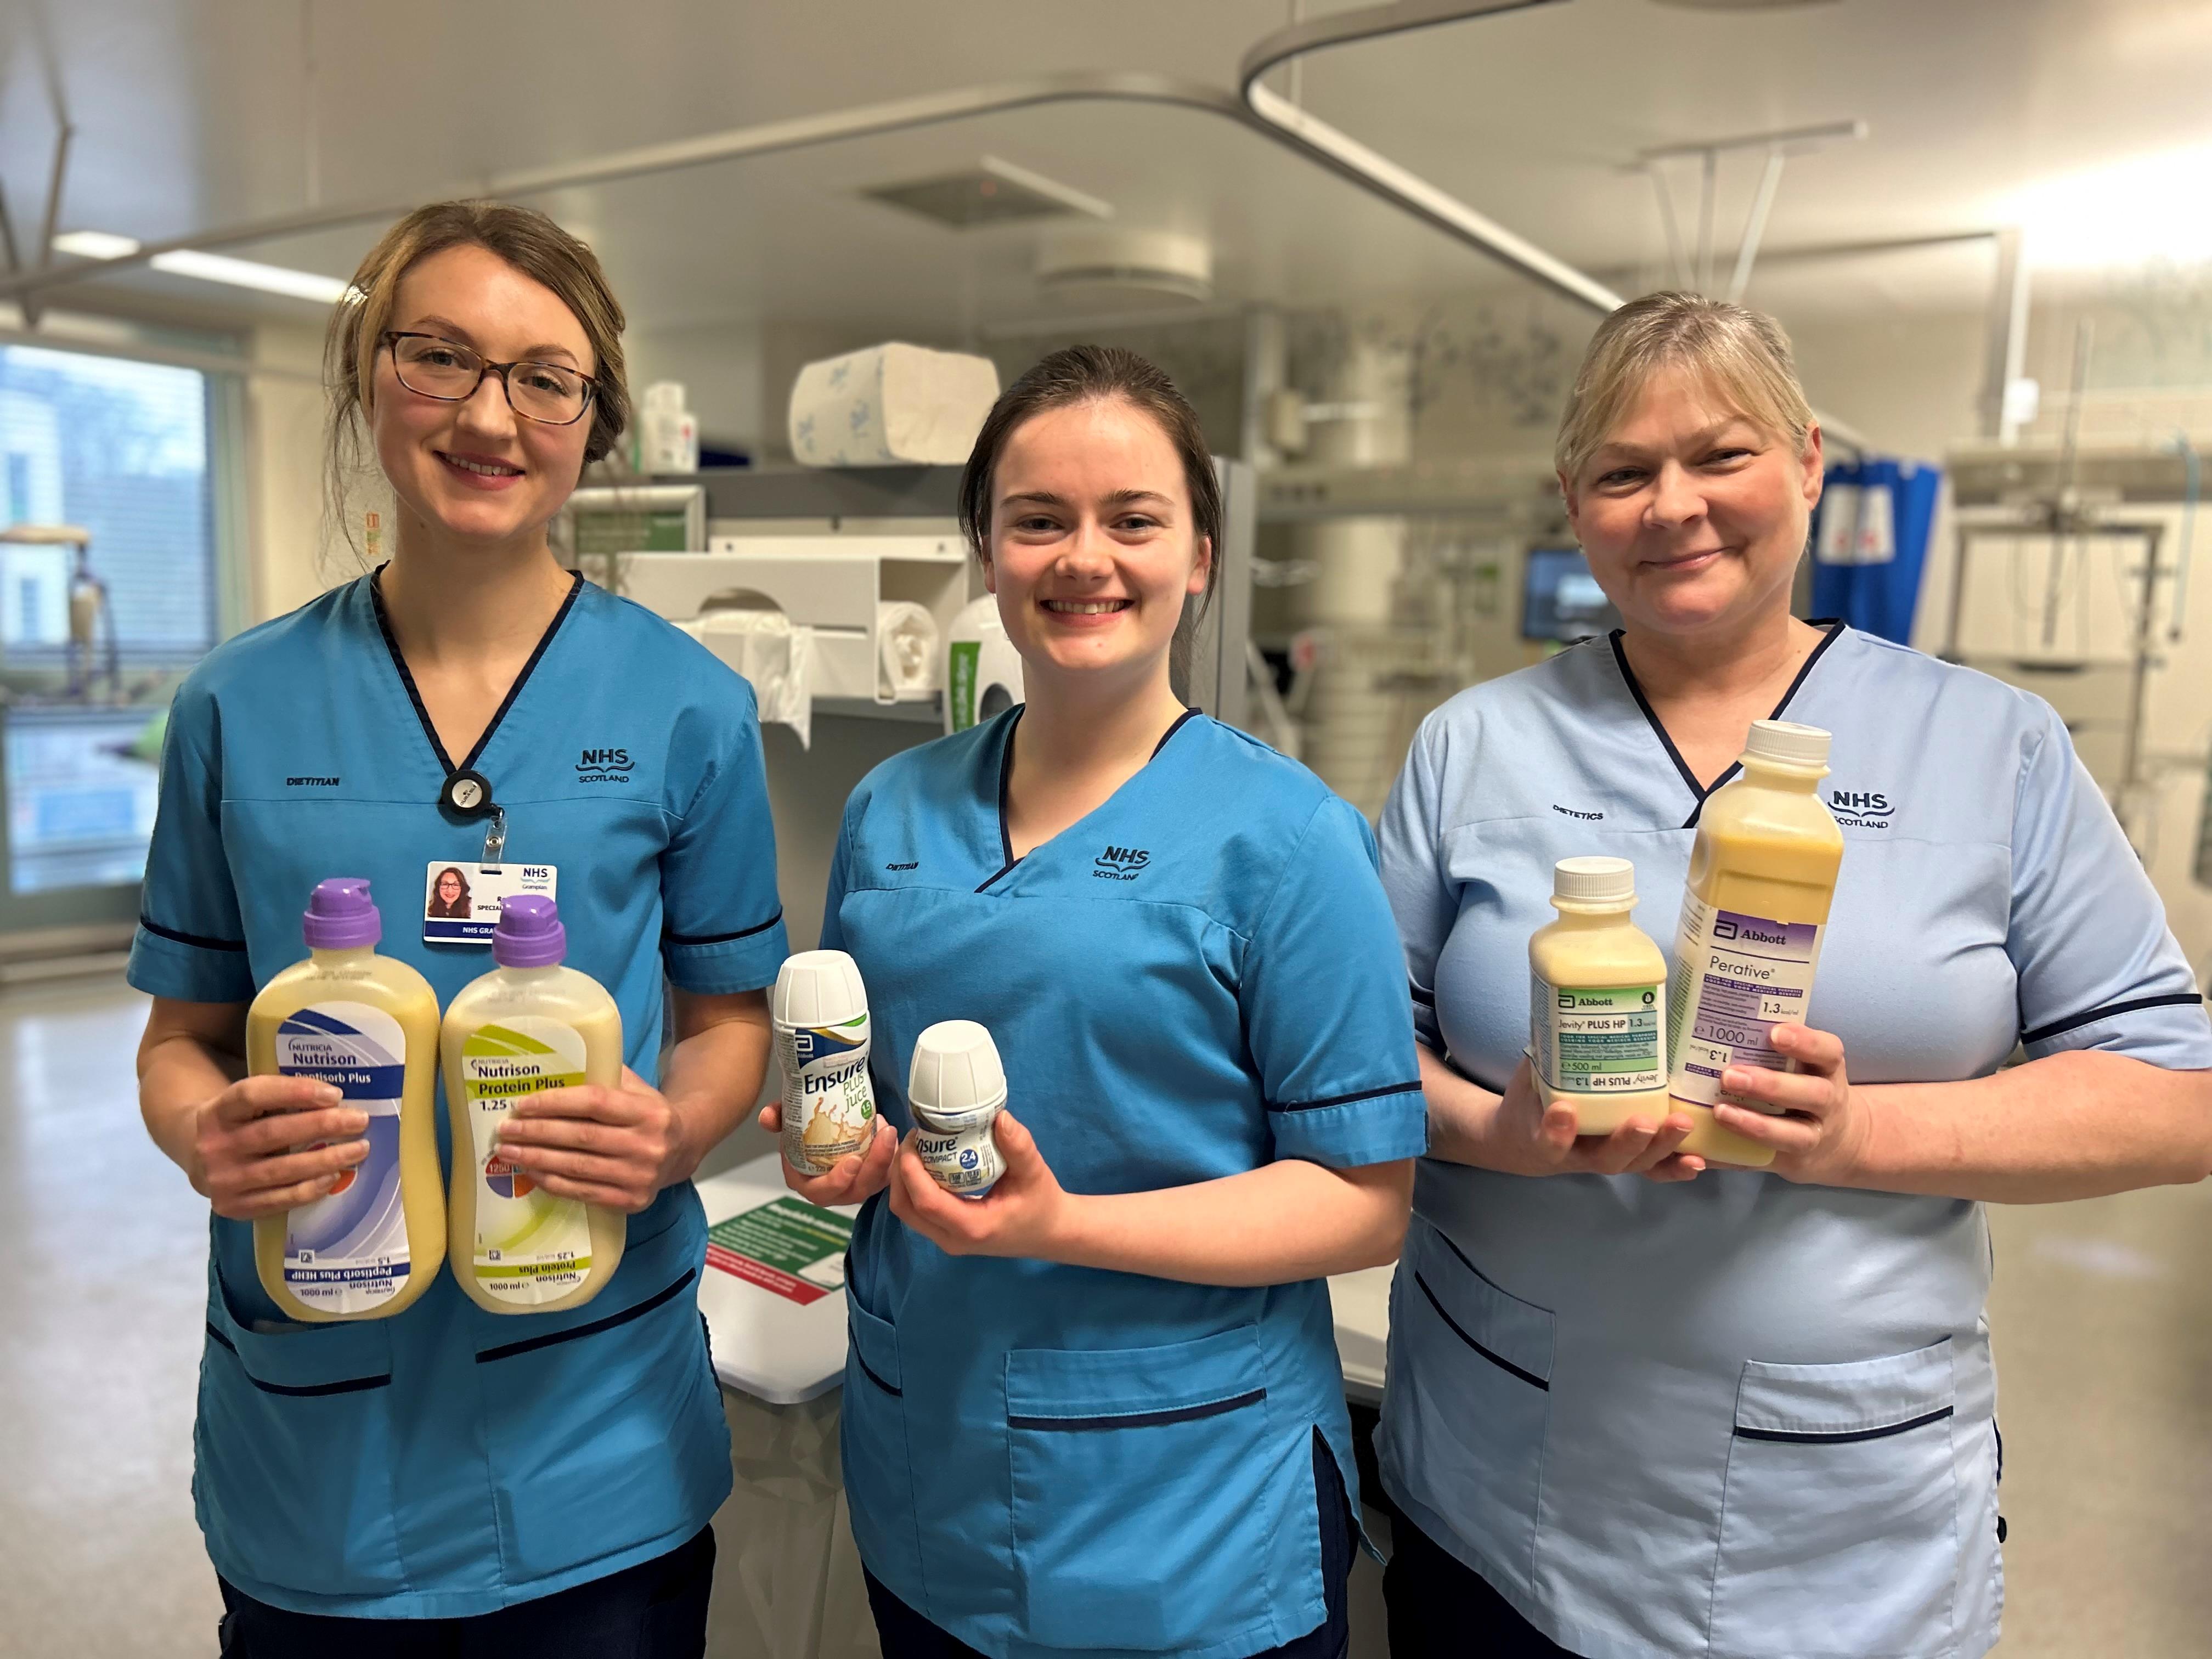 Rosa Holt, Alison Welsch and Annie Moar in the Intensive Care Unit at Aberdeen Royal Infirmary.